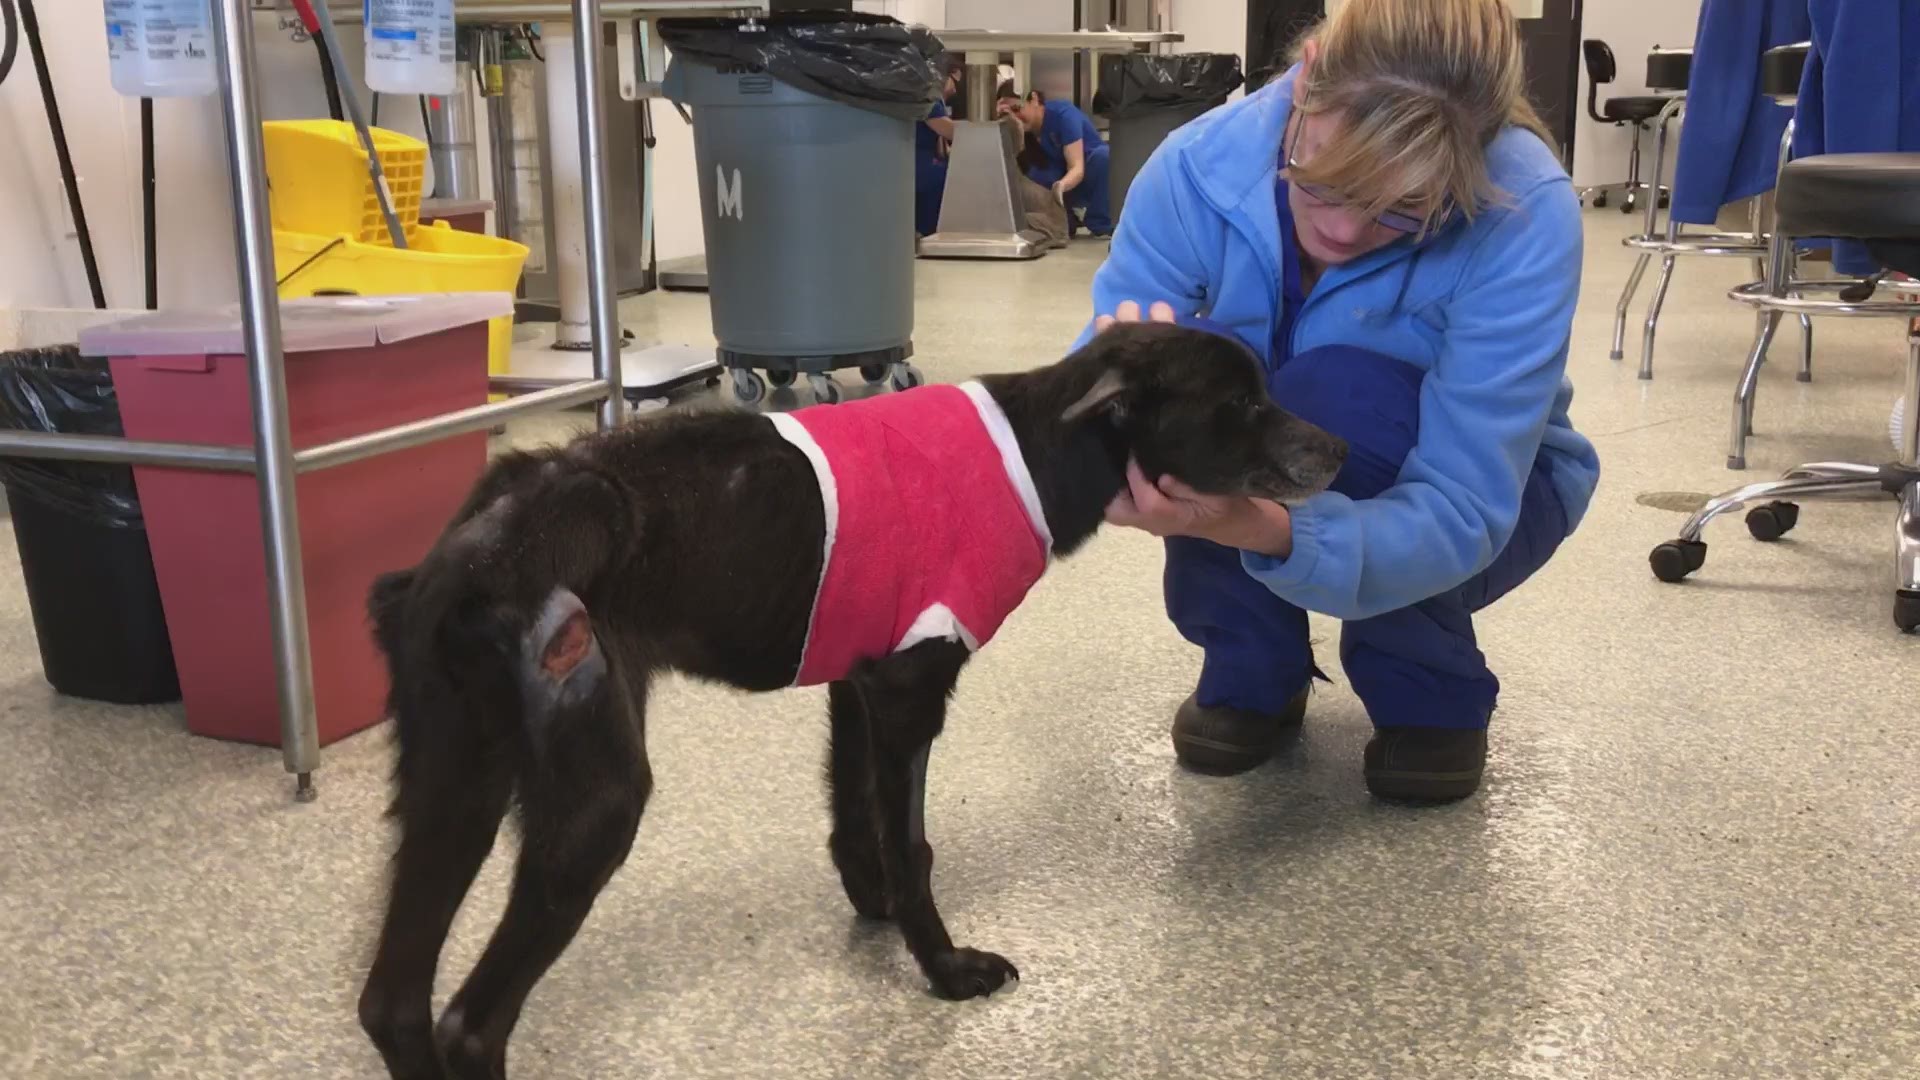 A 1-year-old terrier mix was found abused and abandoned in a Houston-area dumpster last week. She was rescued by the Houston SPCA and is on the road to recovery.